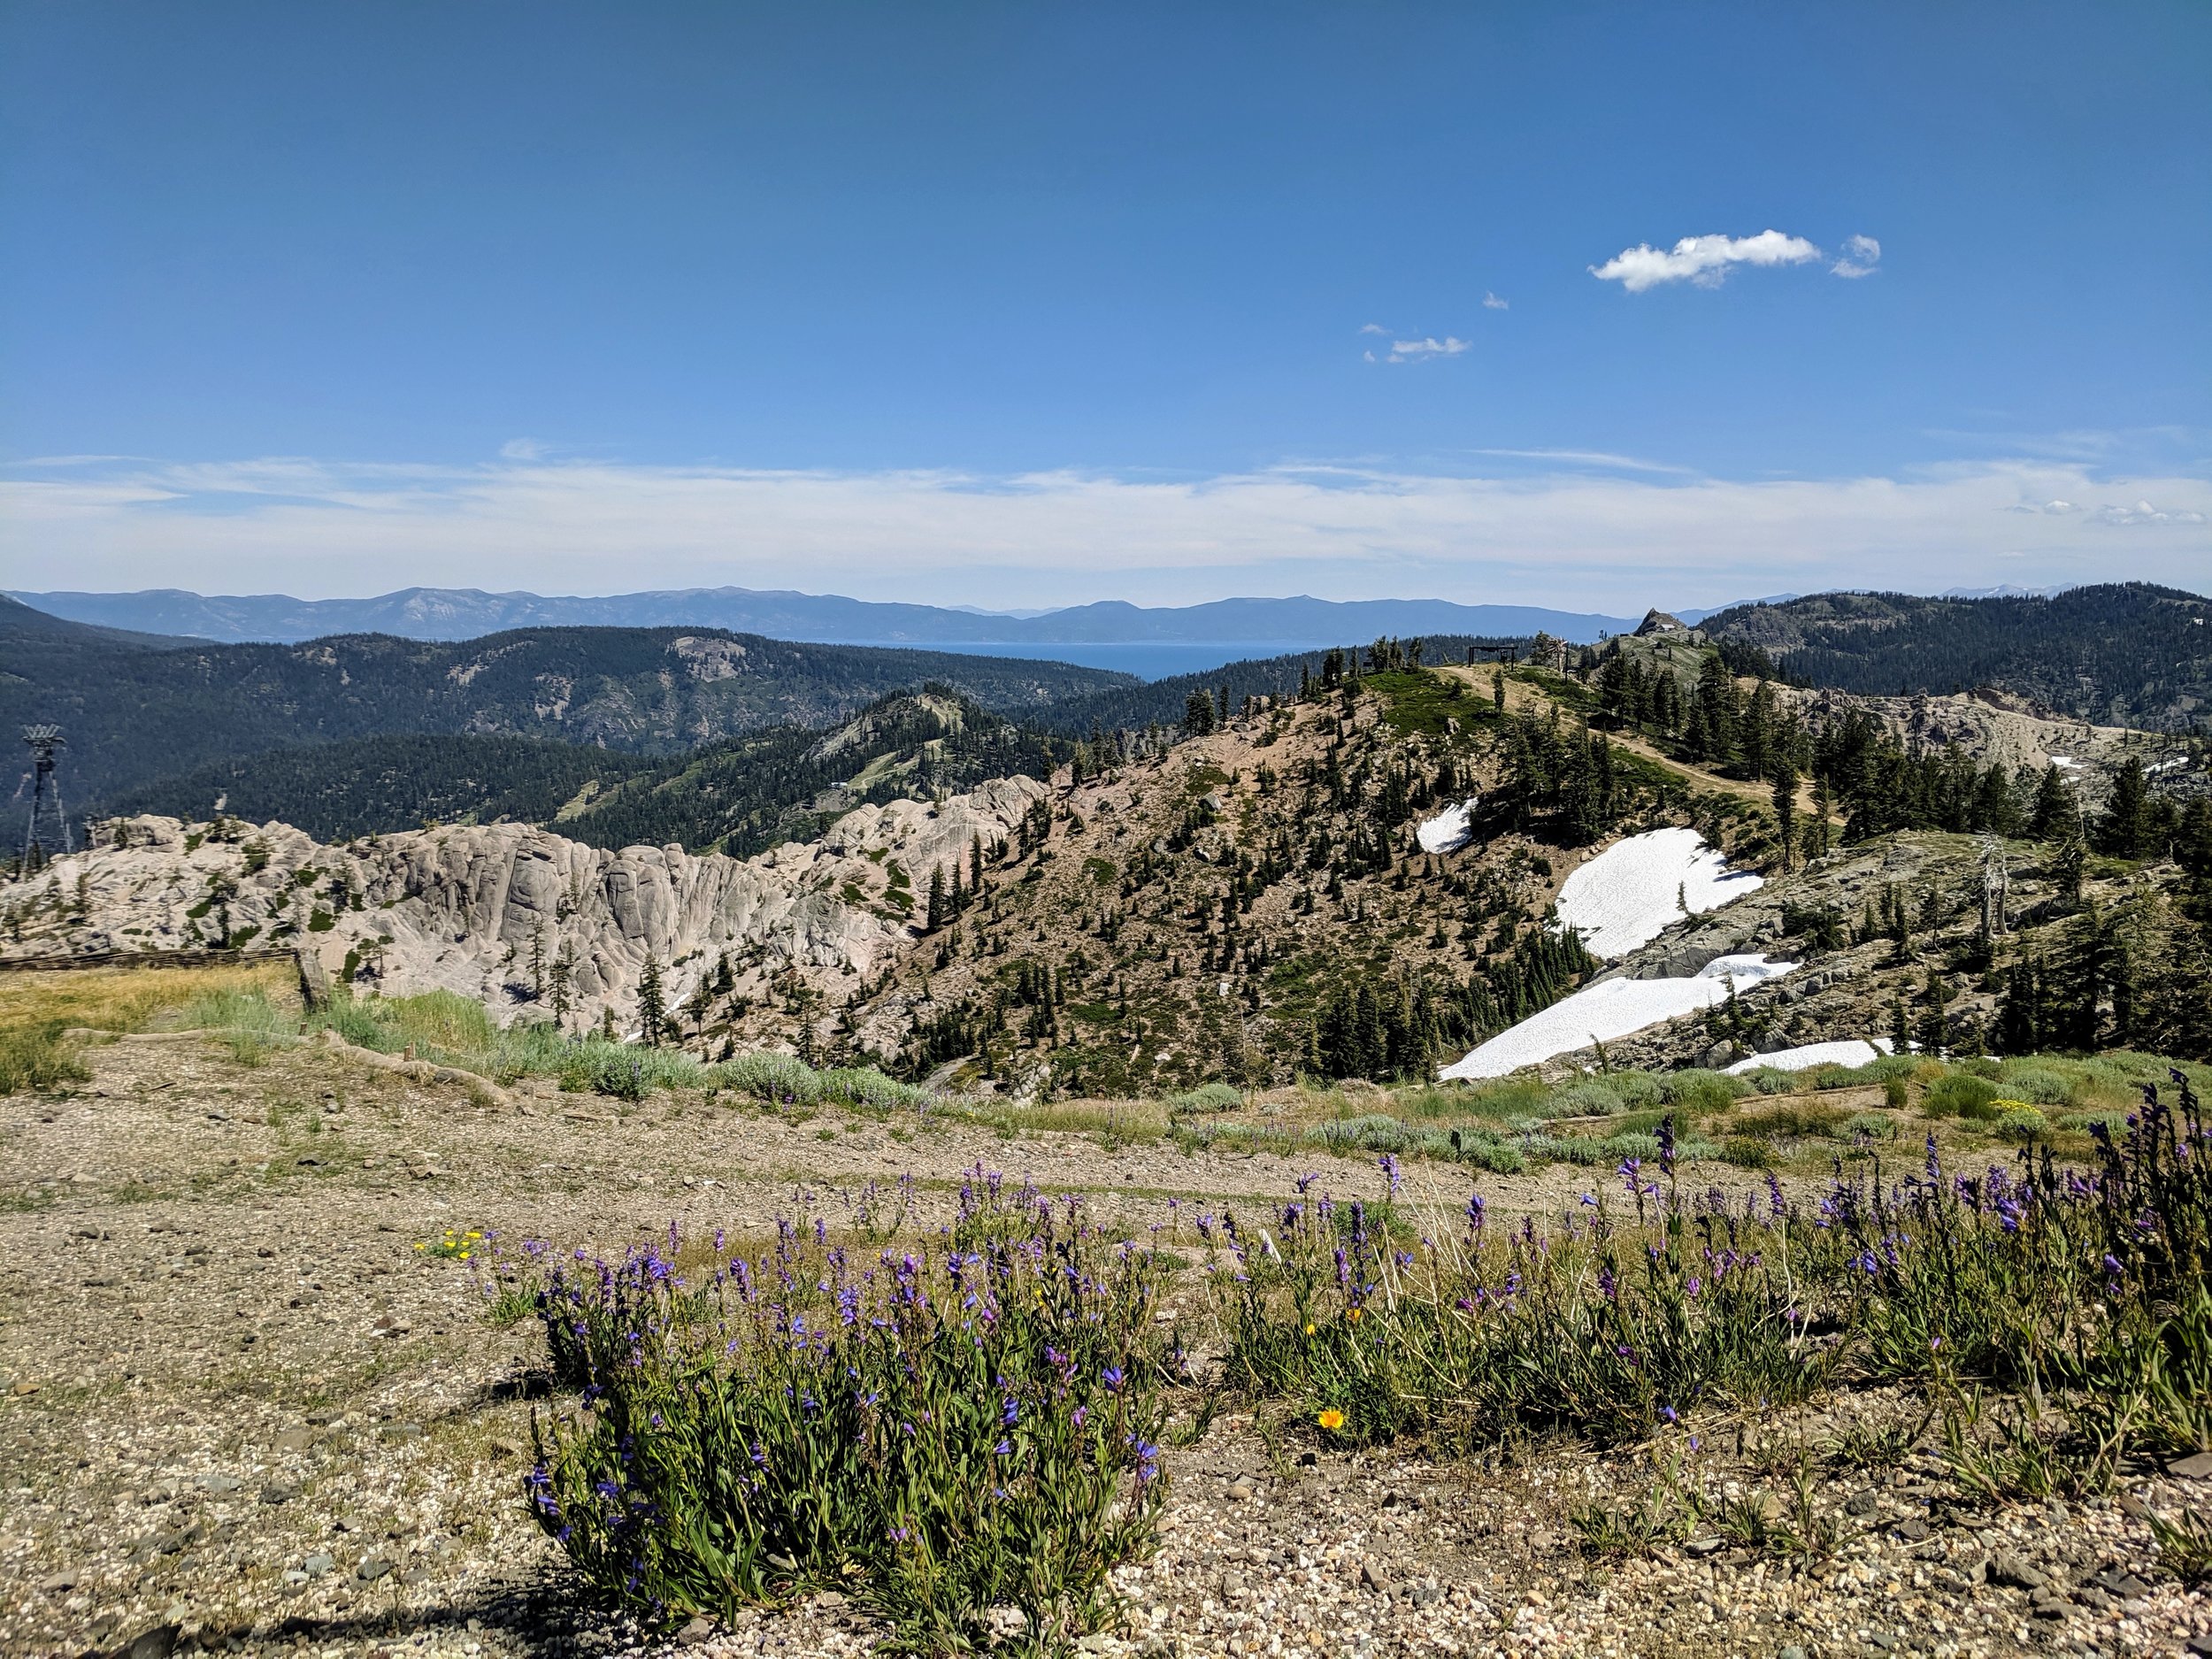  View from High Camp at Squaw Valley with Lake Tahoe in distance. 